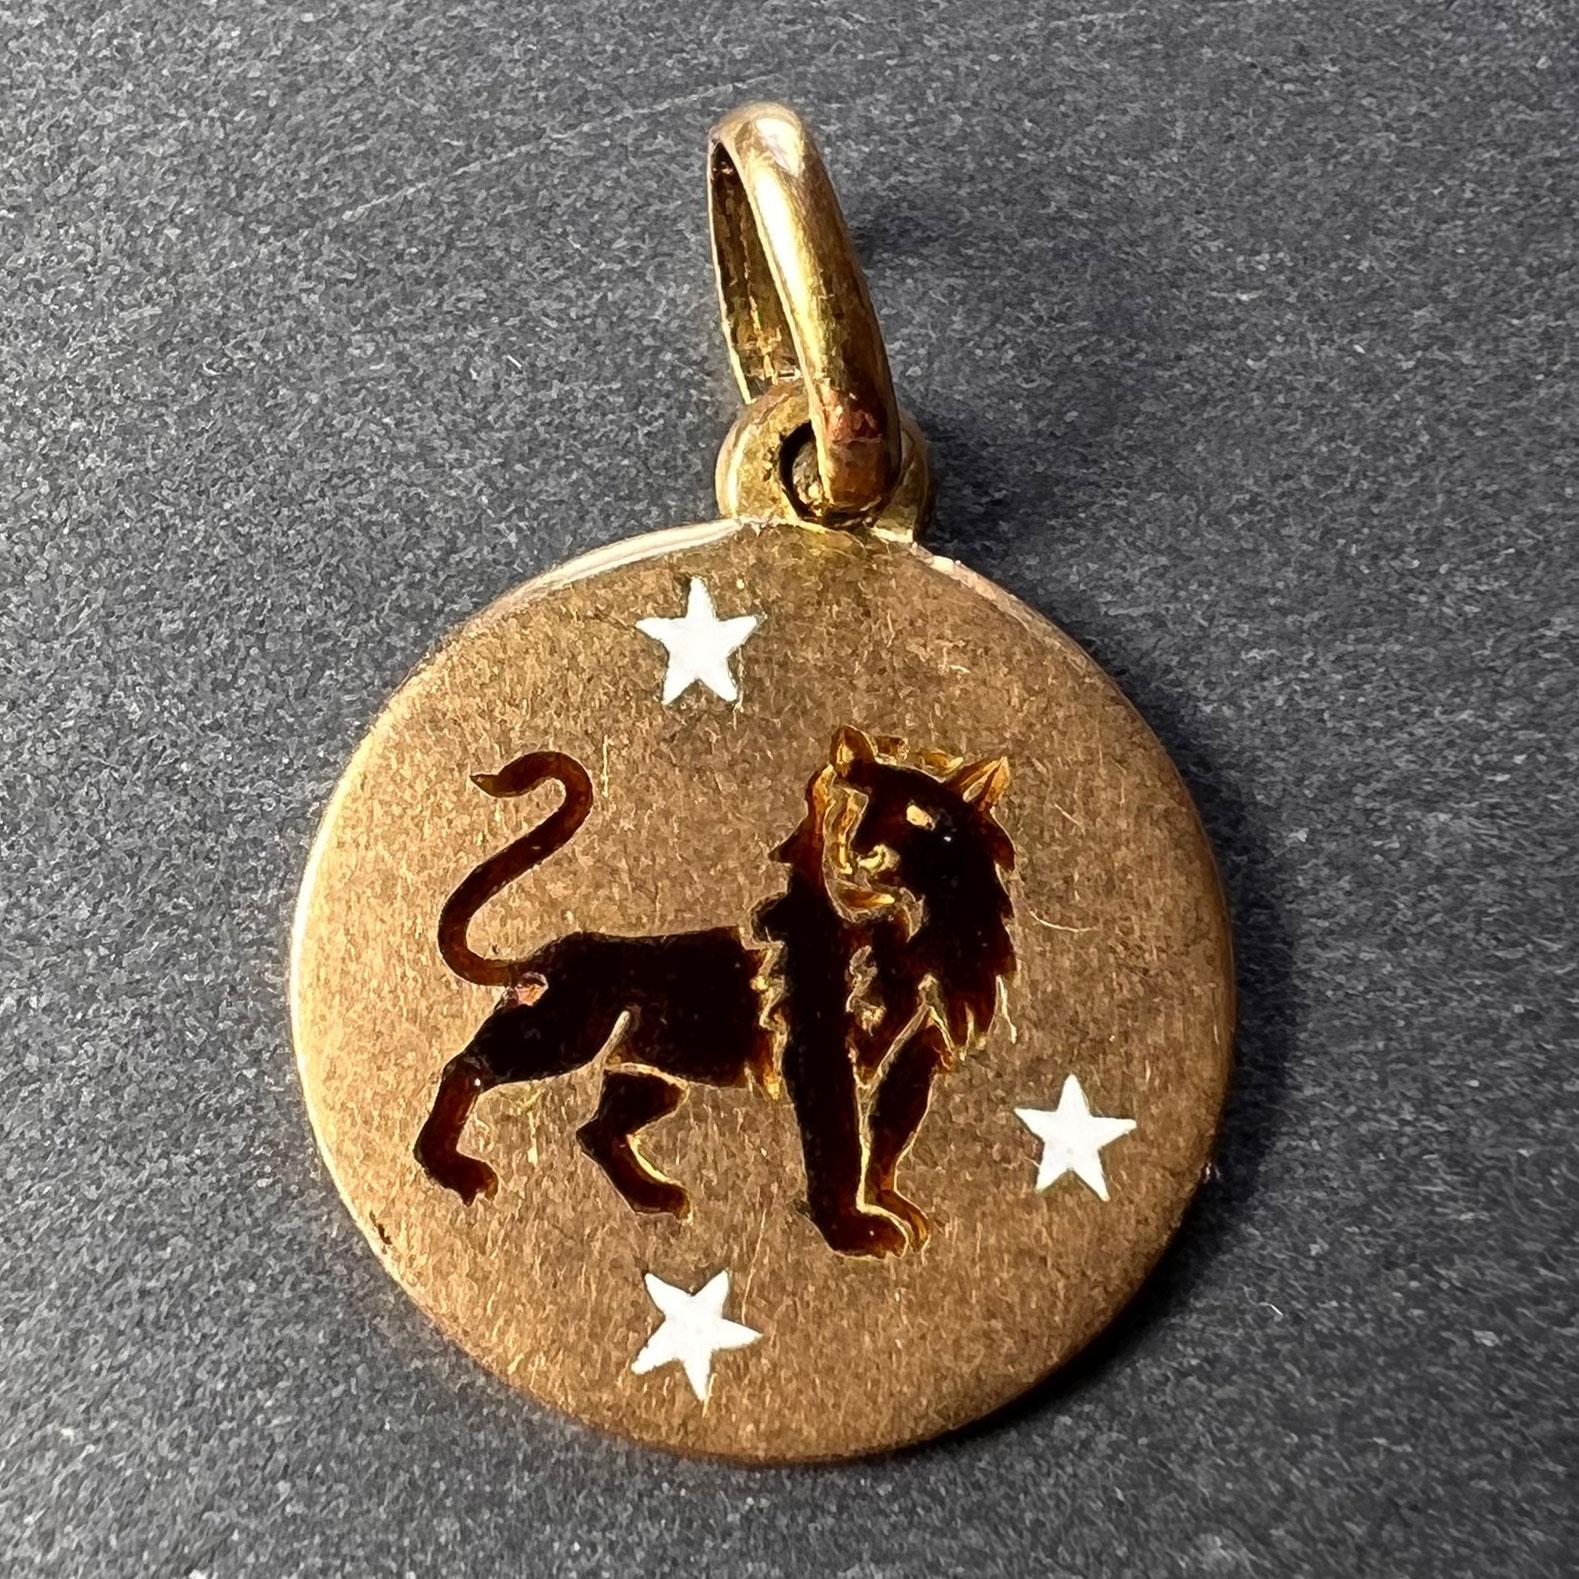 An 18 karat (18K) yellow gold charm pendant designed as the Zodiac star sign of Leo depicting an enamel lion with stars. Stamped 750 for 18 karat gold and 731MI for Italian manufacture to the reverse.
 
Dimensions: 1.7 x 1.4 x 0.1 cm (not including